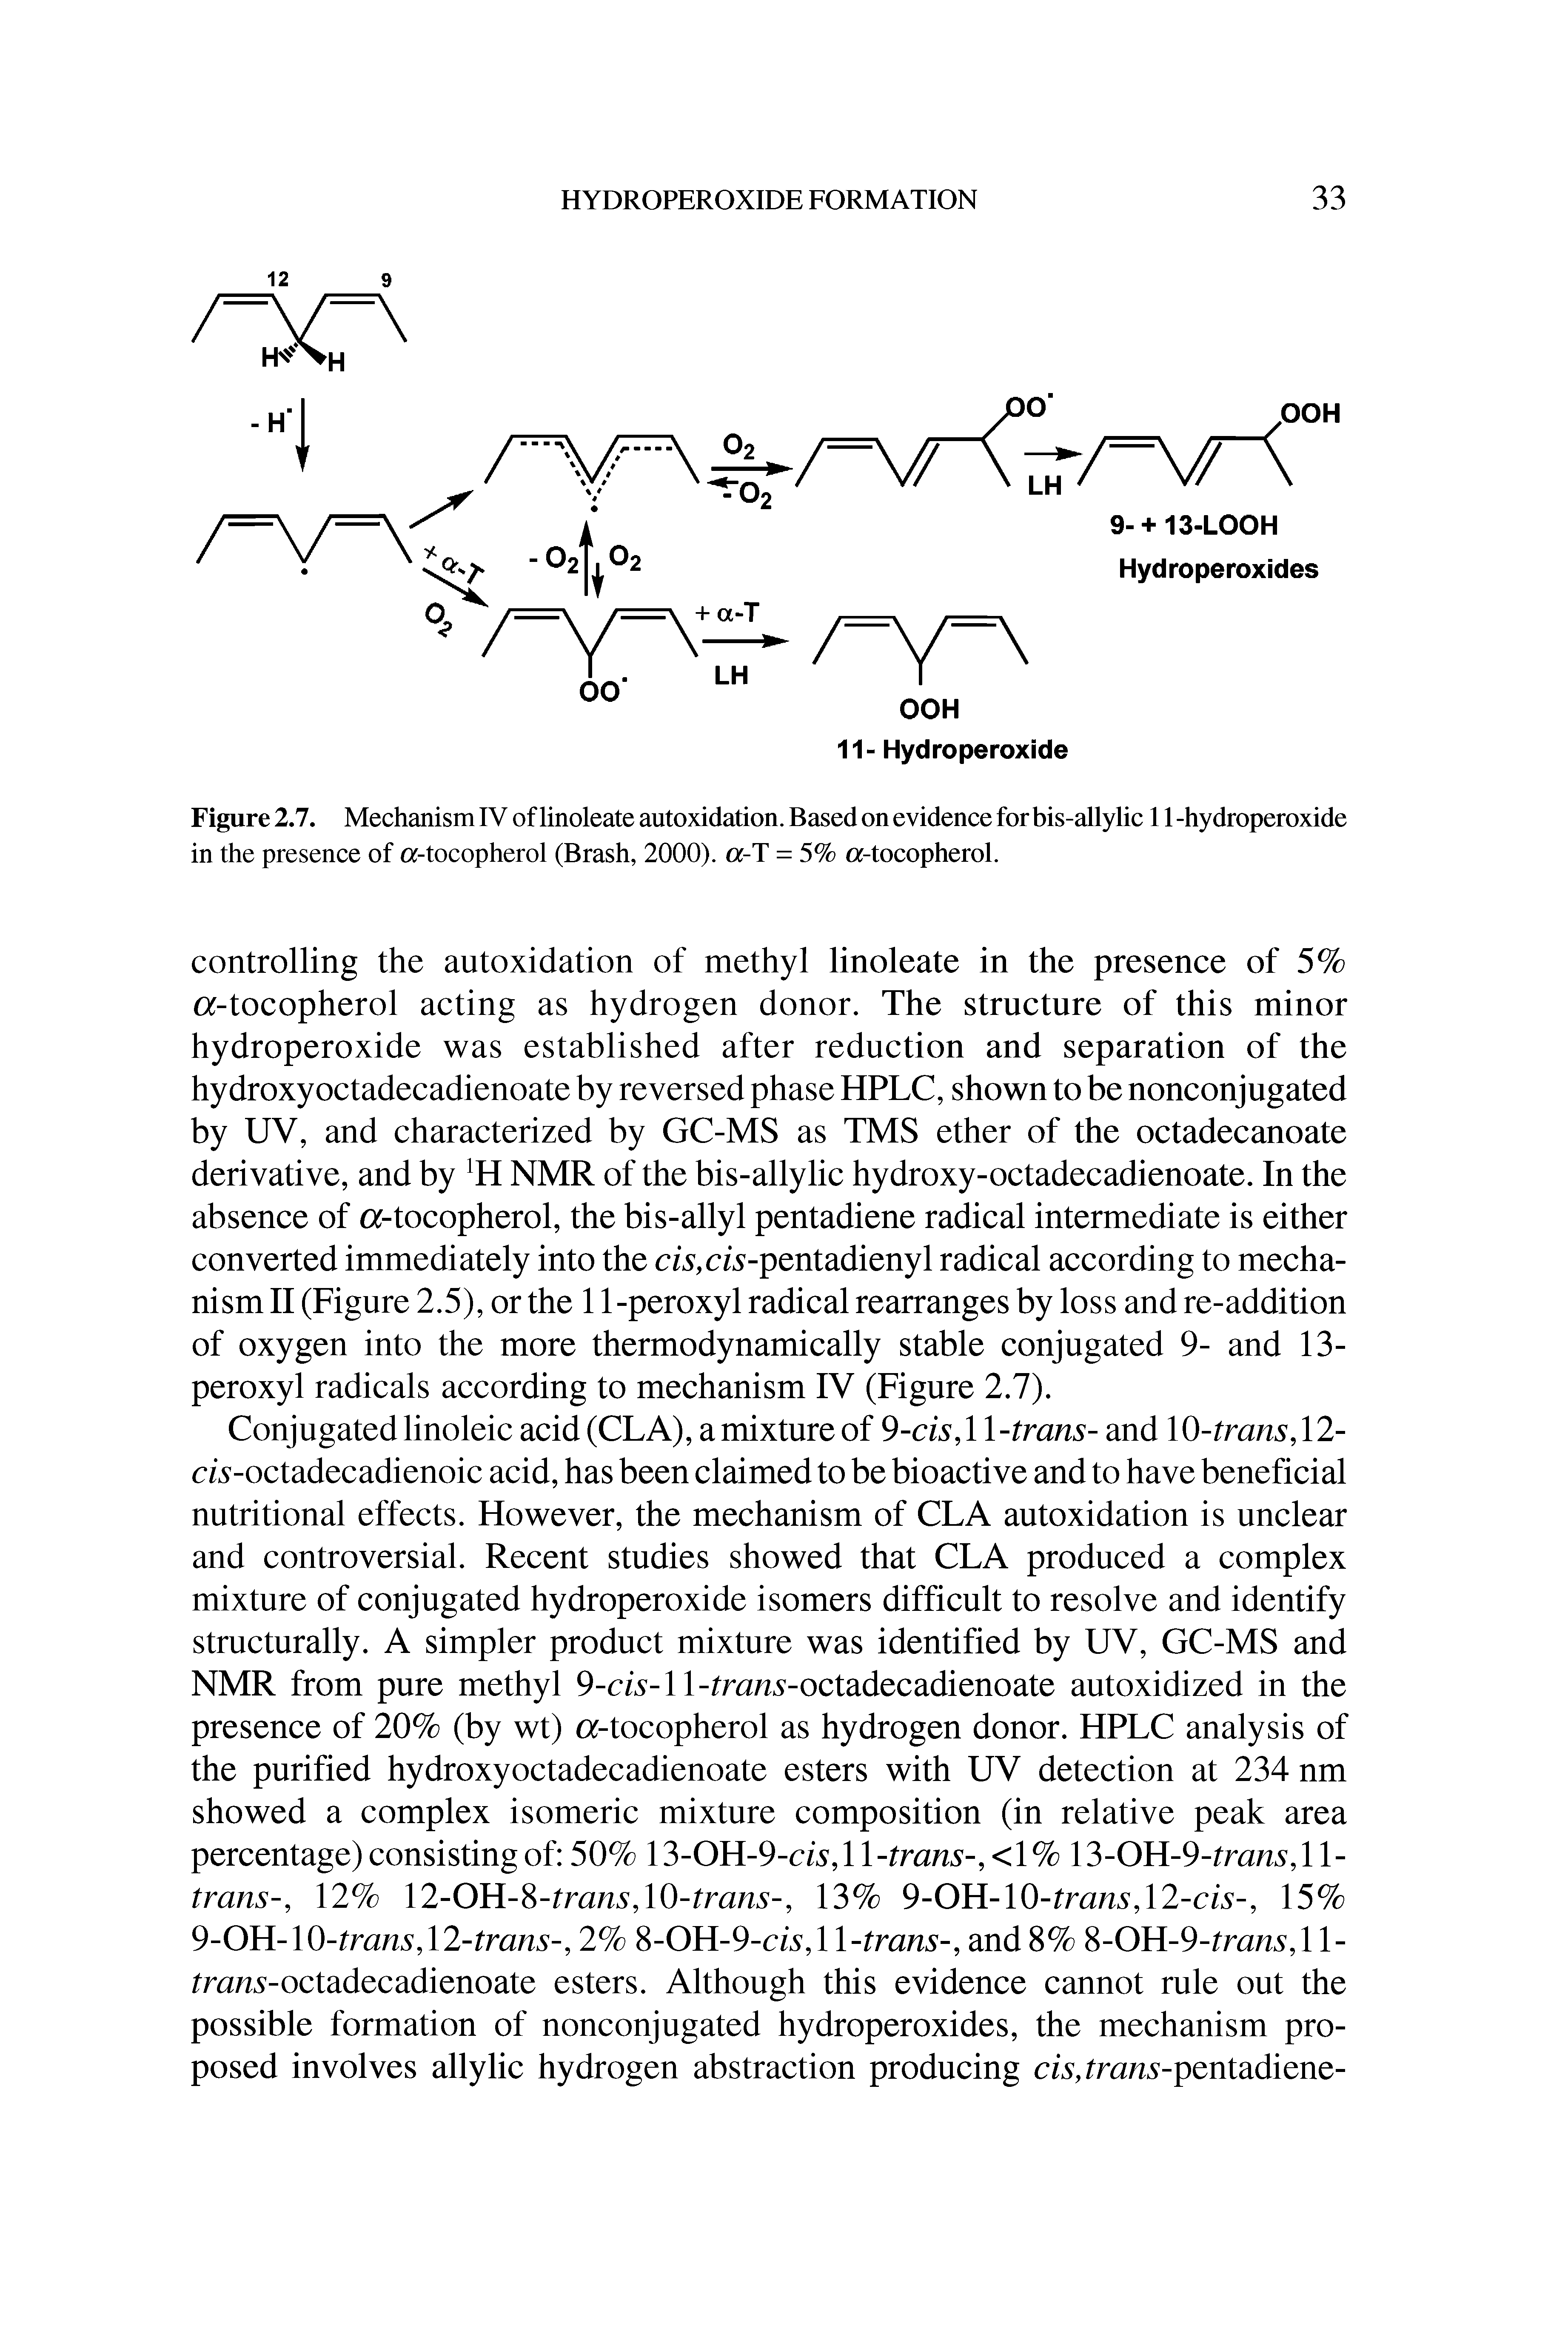 Figure 2.7. Mechanism IV of linoleate autoxidation. Based on evidence forbis-allylic 11 -hydroperoxide in the presence of a-tocopherol (Brash, 2000). a-T = 5% a-tocopherol.